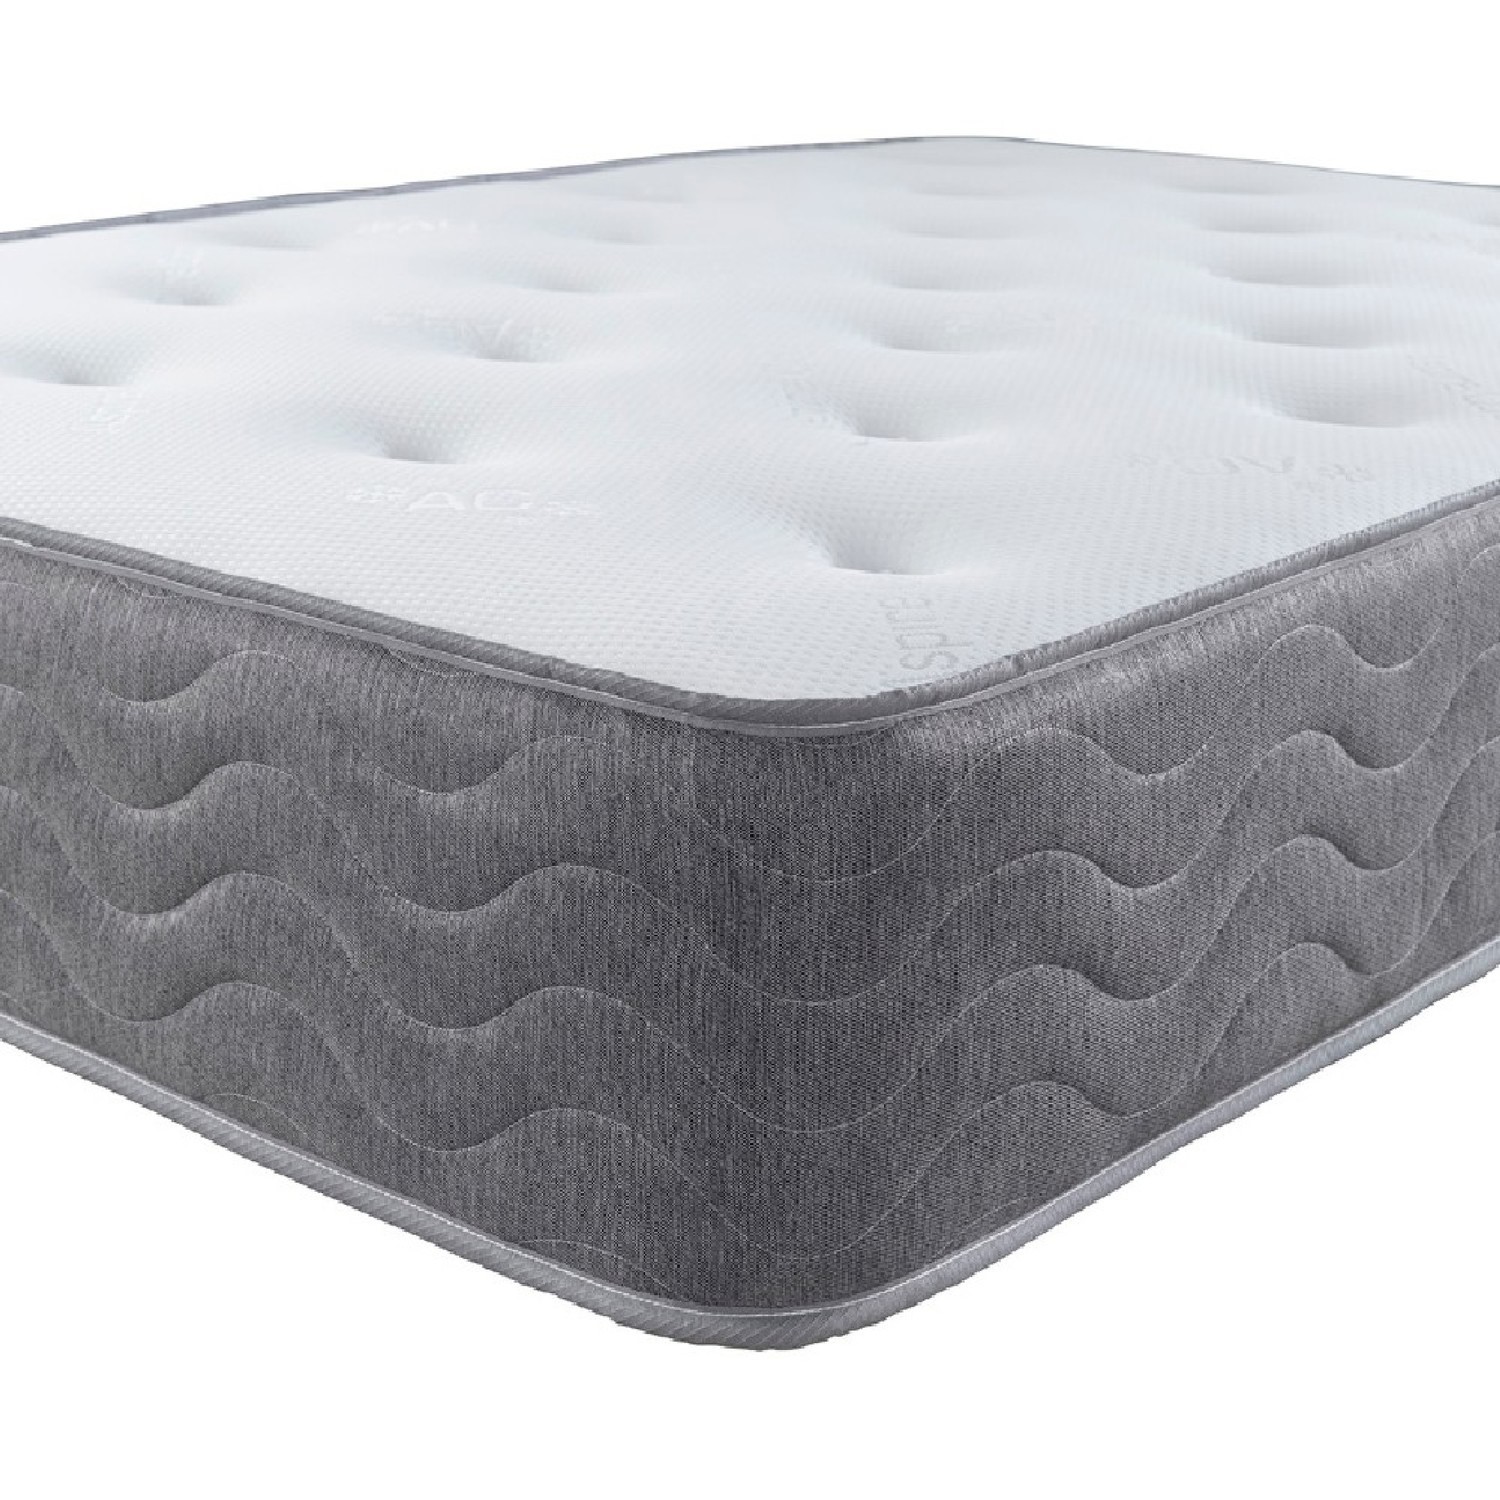 Aspire furniture air conditioned natural 1000 pocket spring mattress -single